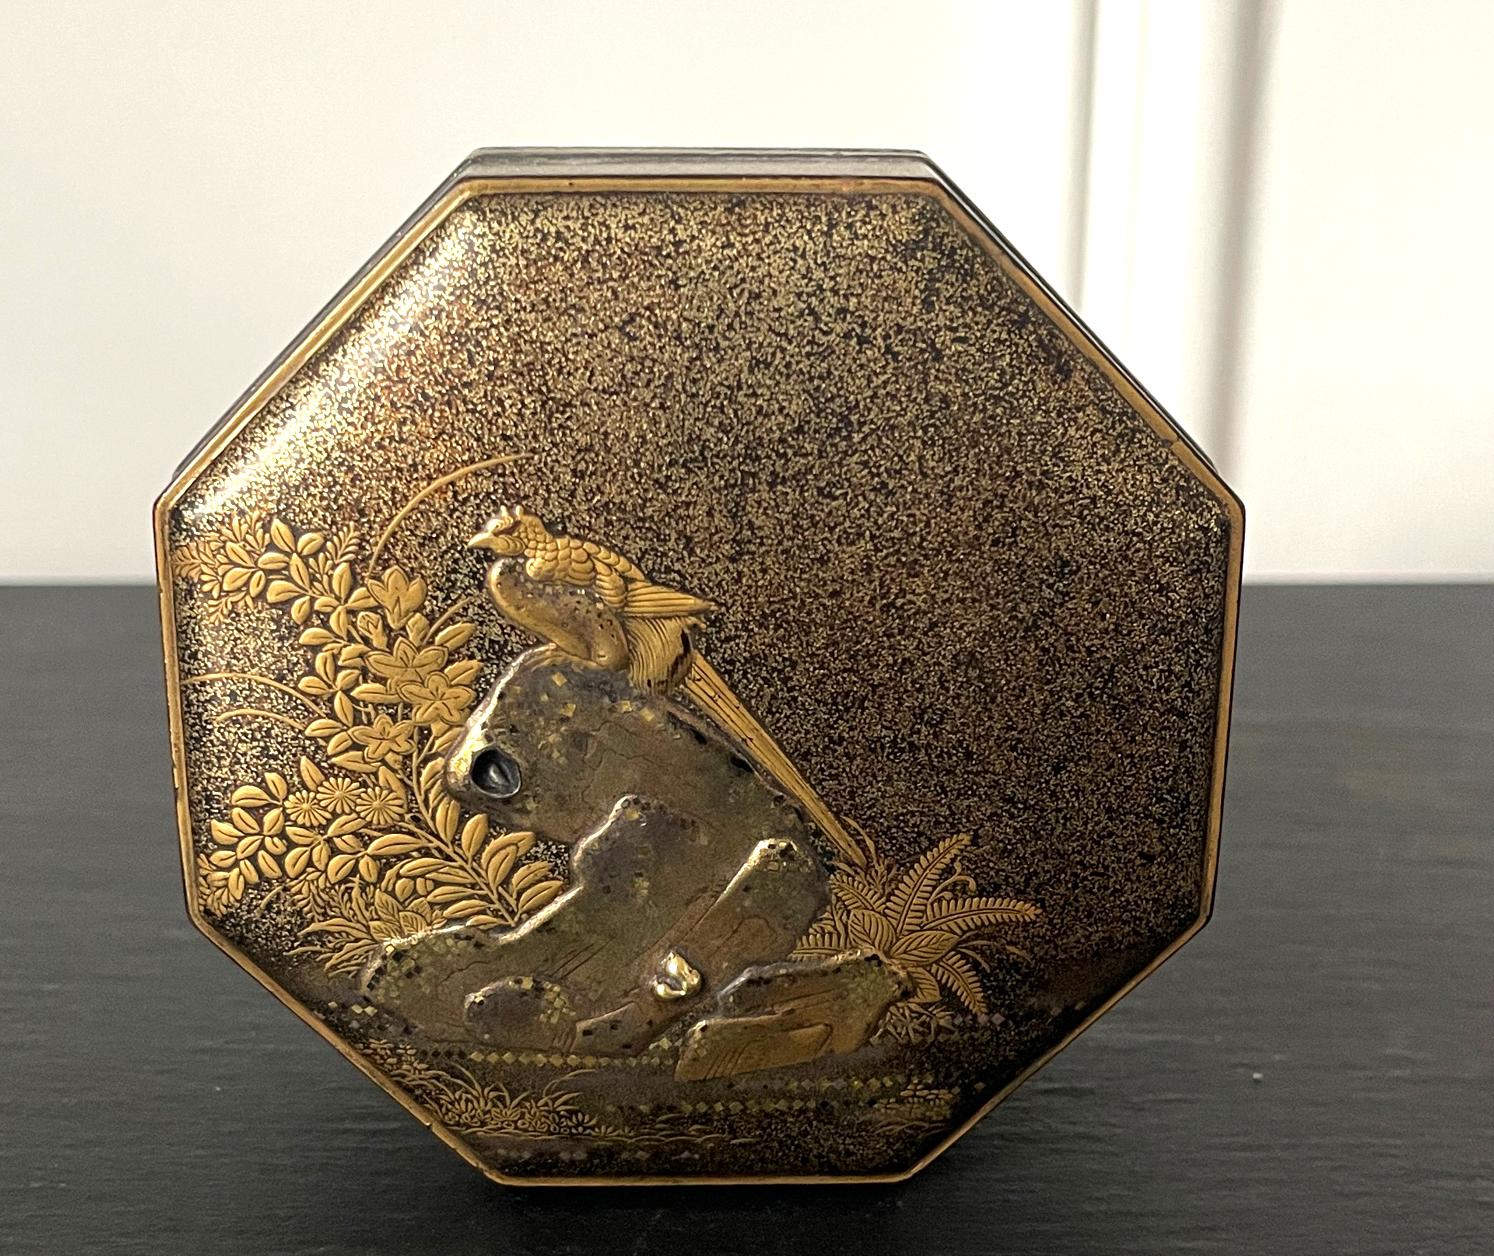 Inlay Exquisite Early Japanese Lacquer Kobako Box with Insert Tray